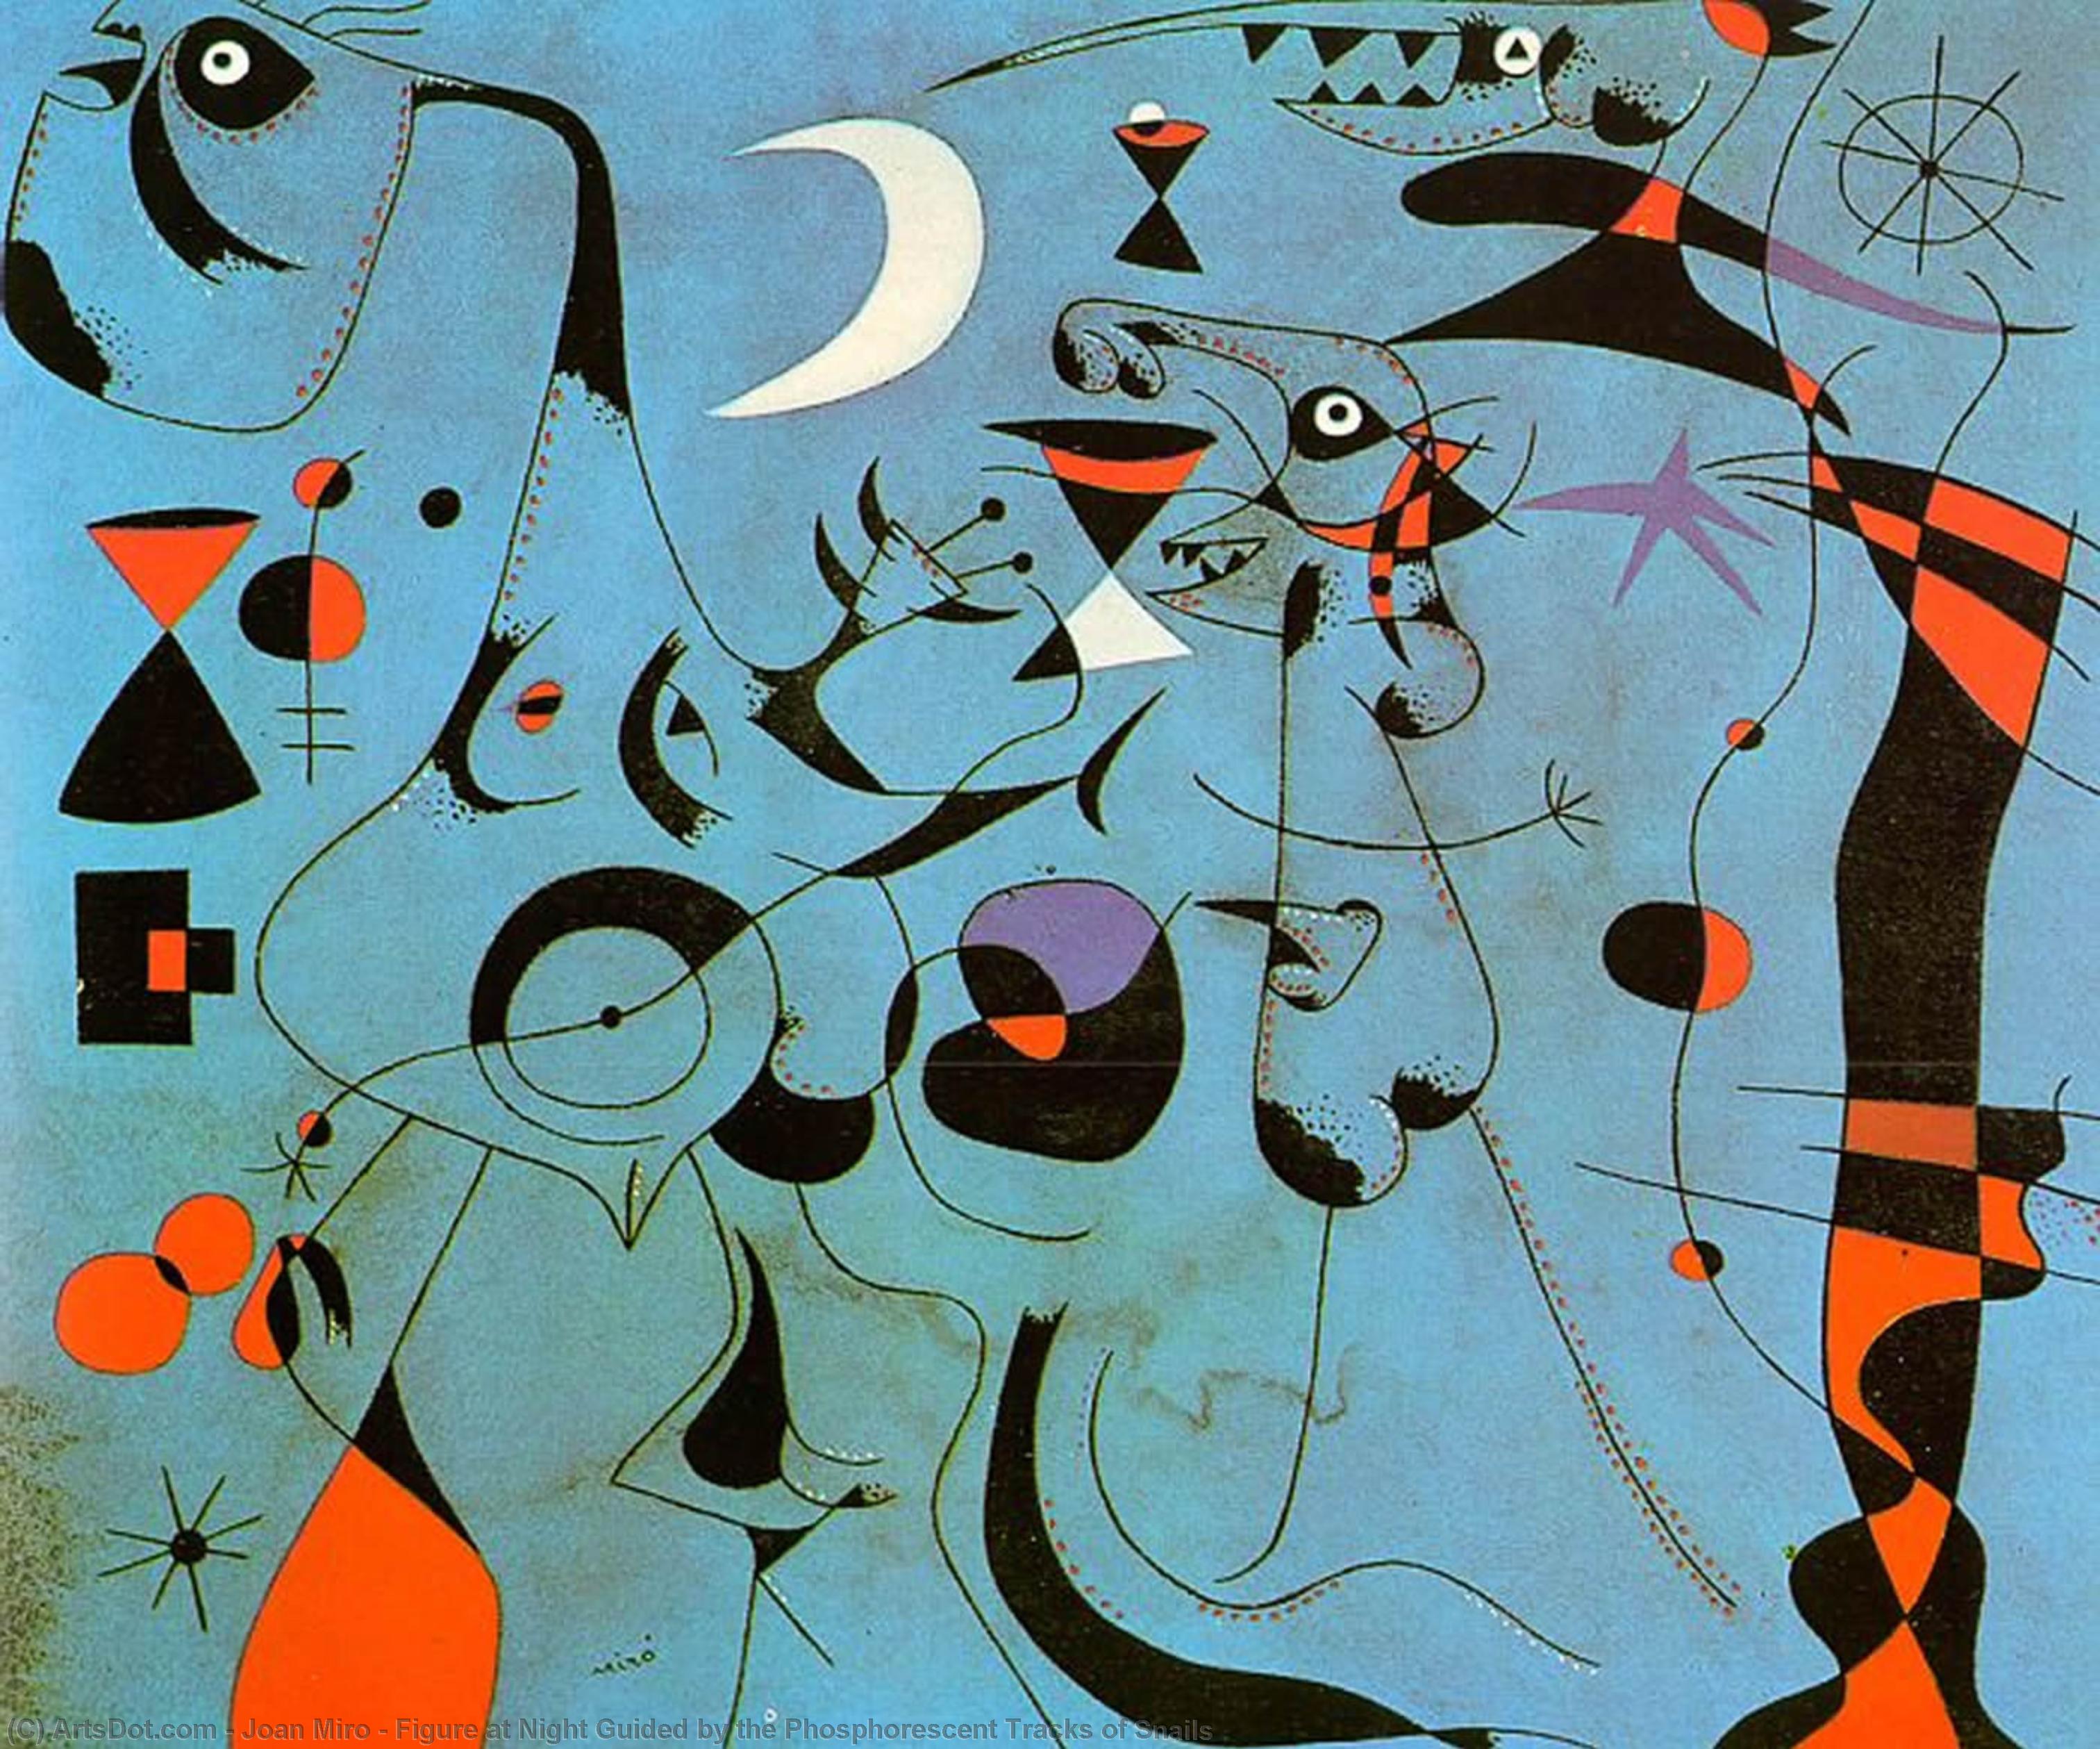 WikiOO.org - Encyclopedia of Fine Arts - Festés, Grafika Joan Miro - Figure at Night Guided by the Phosphorescent Tracks of Snails